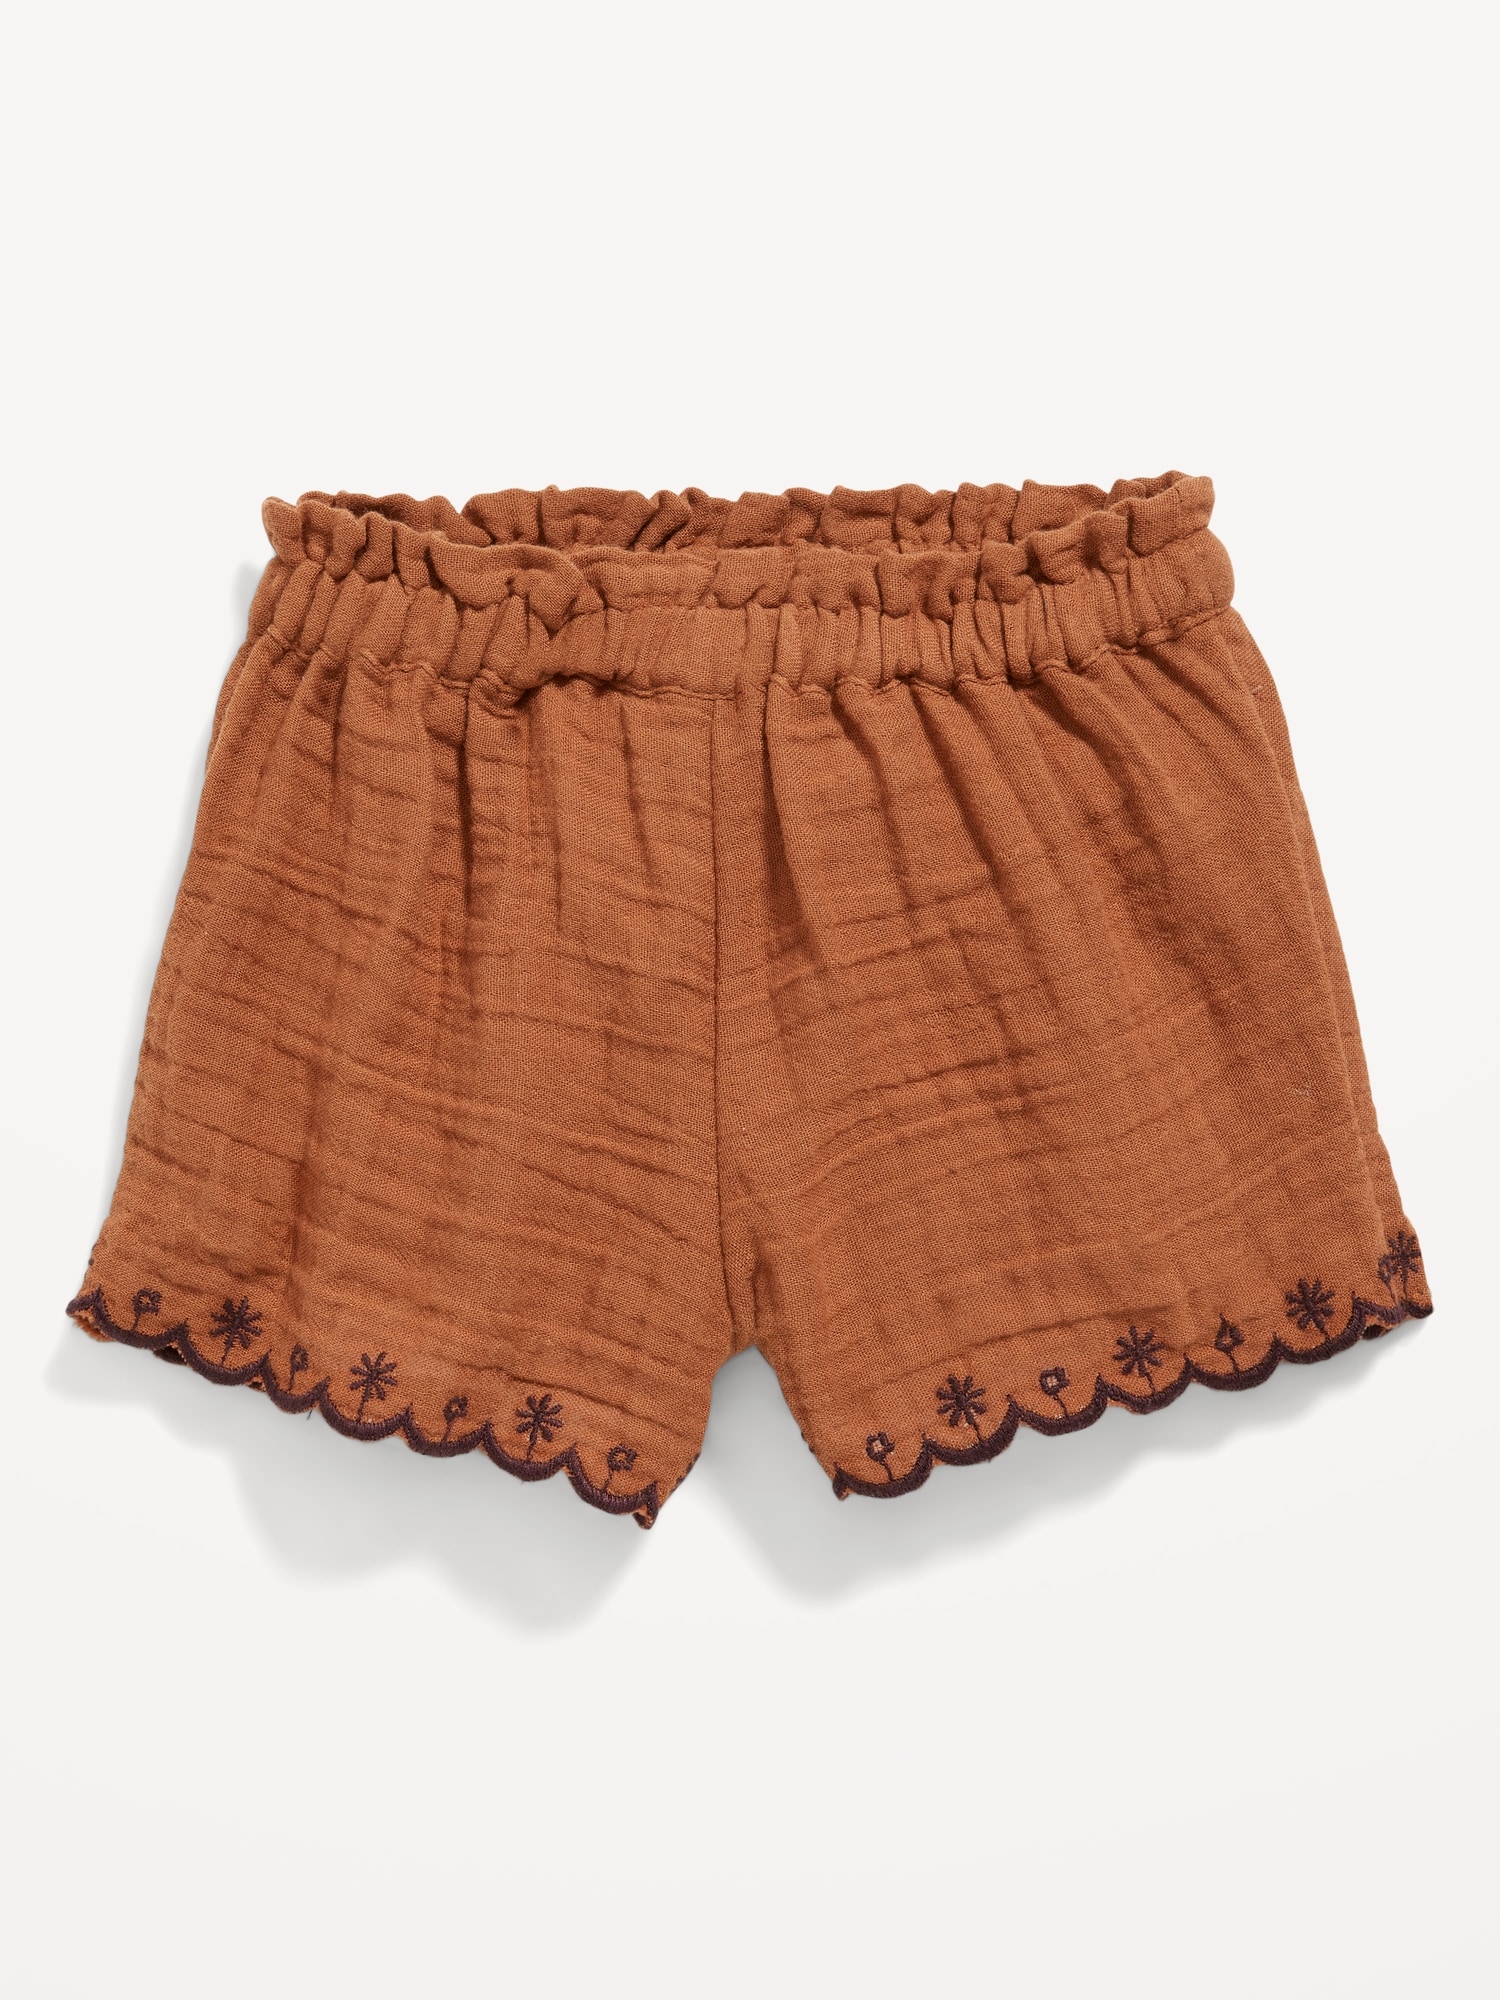 Scallop-Trim Shorts for Baby Hot Deal